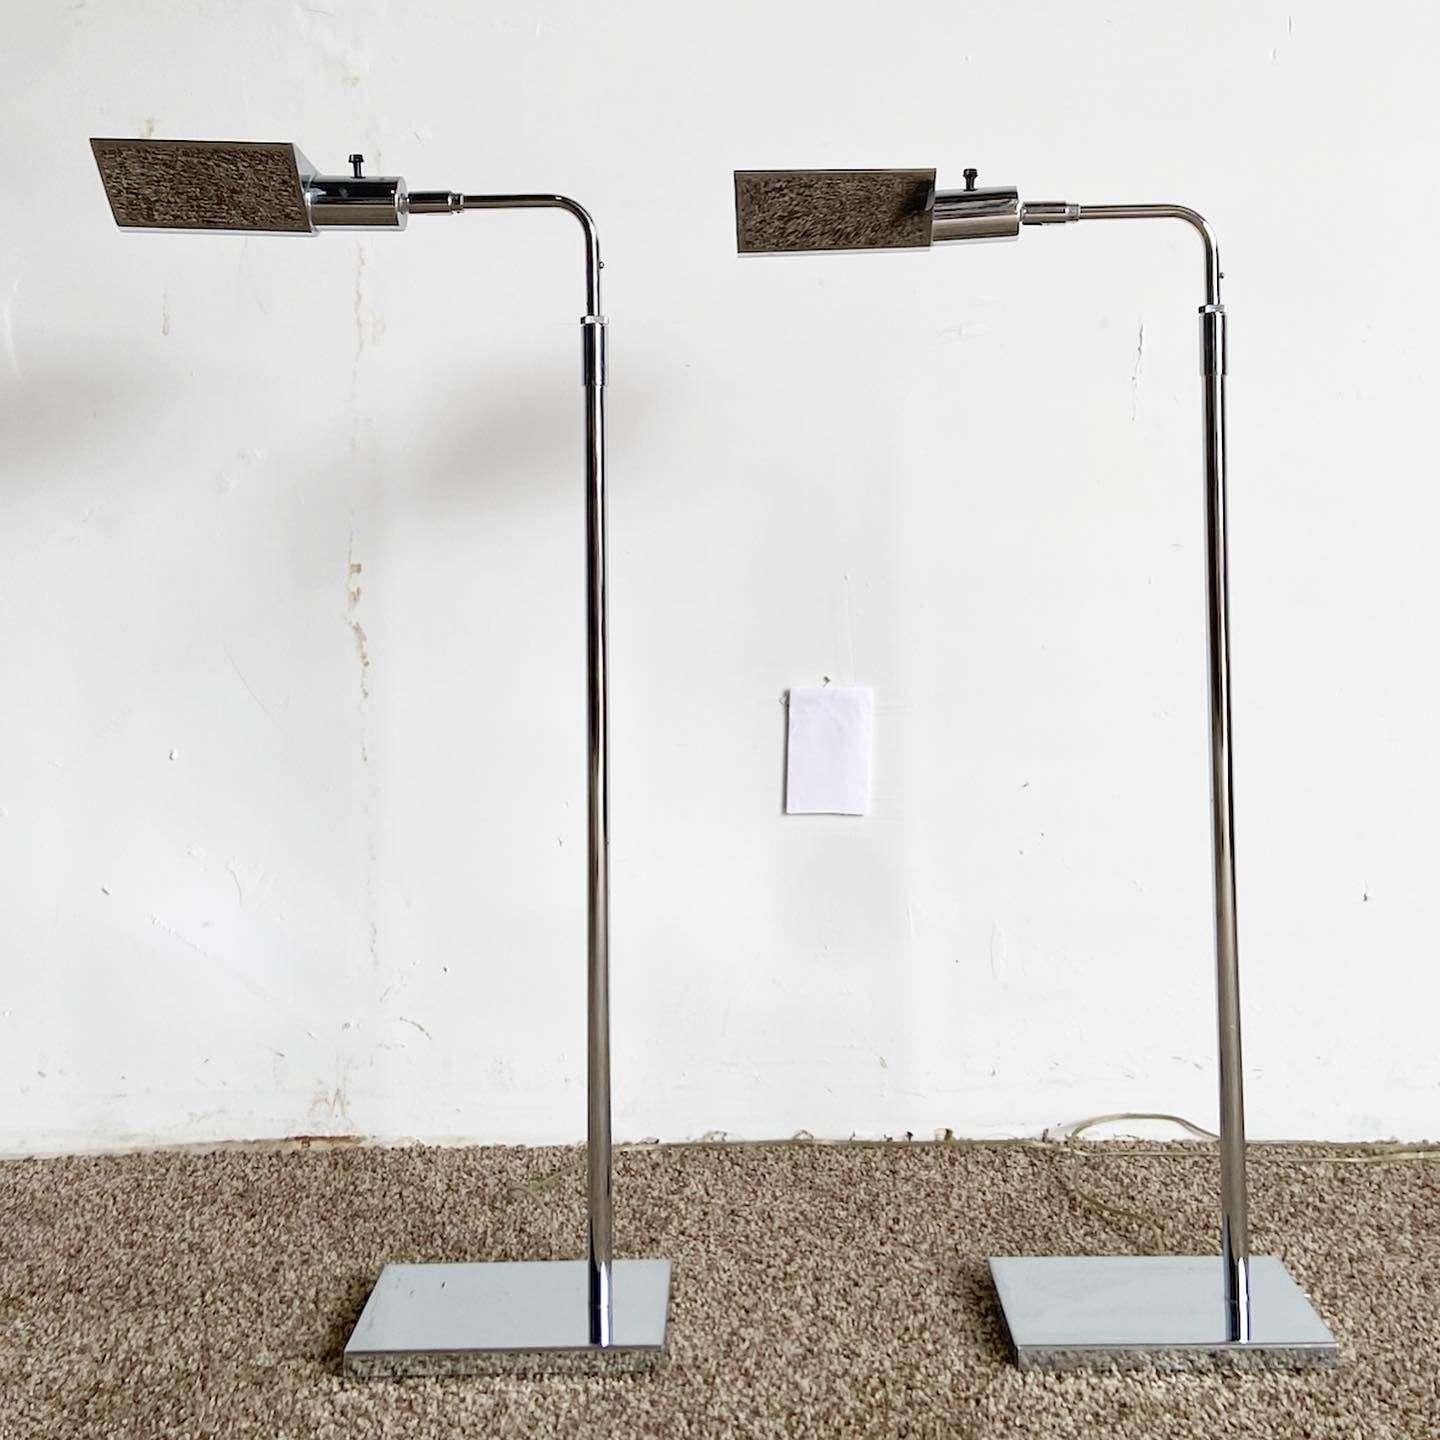 American Mid Century Modern Chrome Pharmacists Floor Lamps - a Pair For Sale